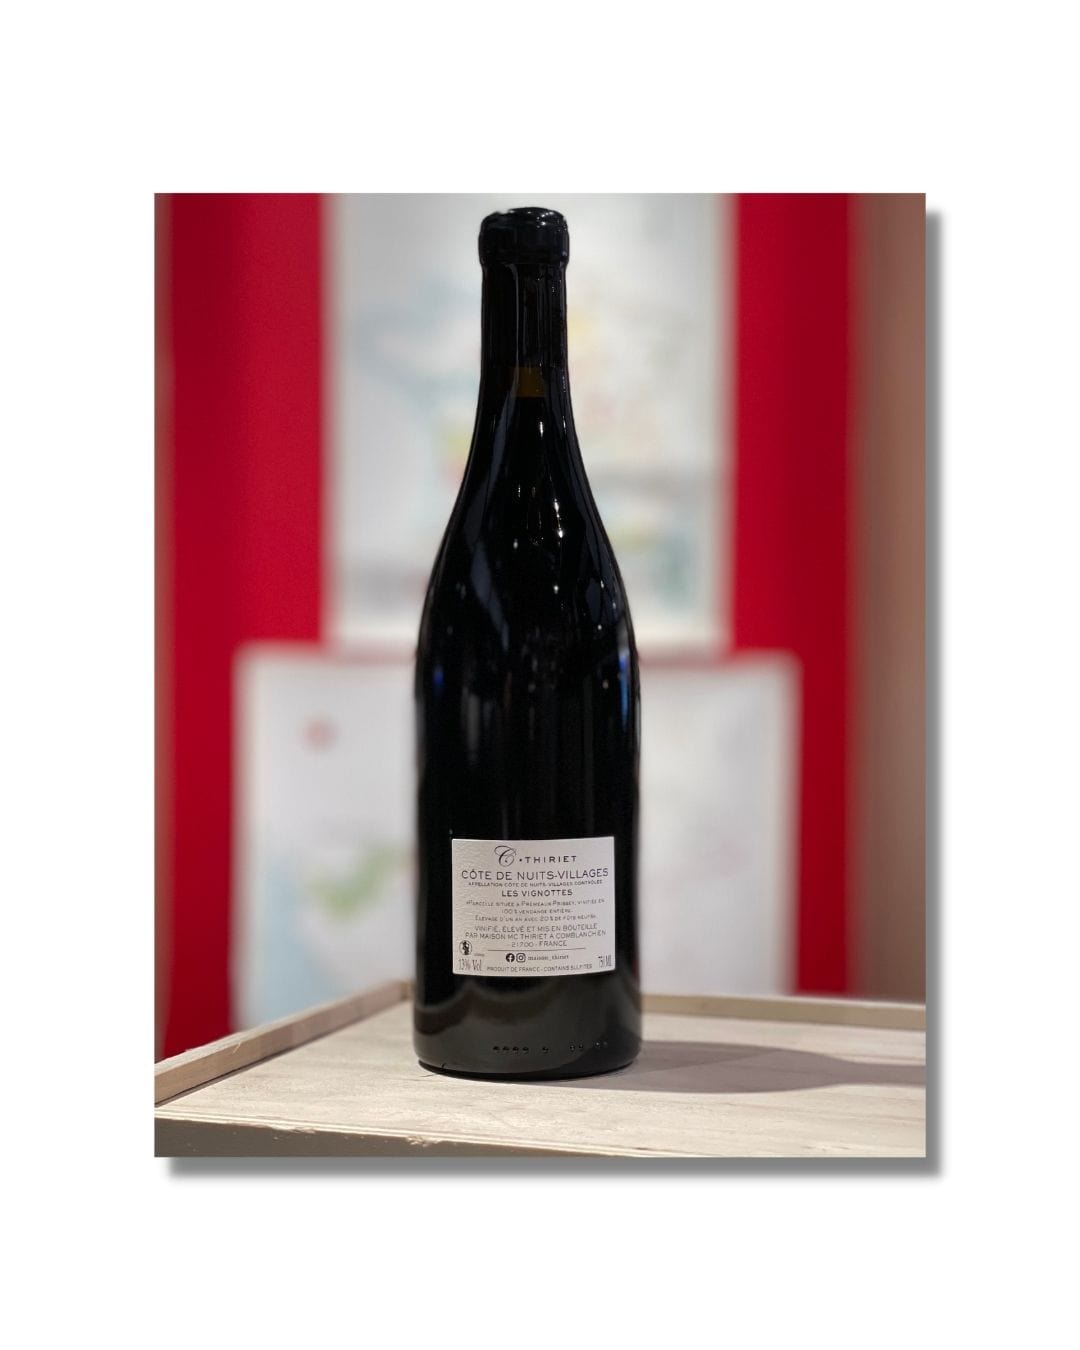 Shop Maison Thiriet Maison Thiriet Cote de Nuits-Village Les Vignottes 2020 online at PENTICTON artisanal French wine store in Hong Kong. Discover other French wines, promotions, workshops and featured offers at pentictonpacific.com 